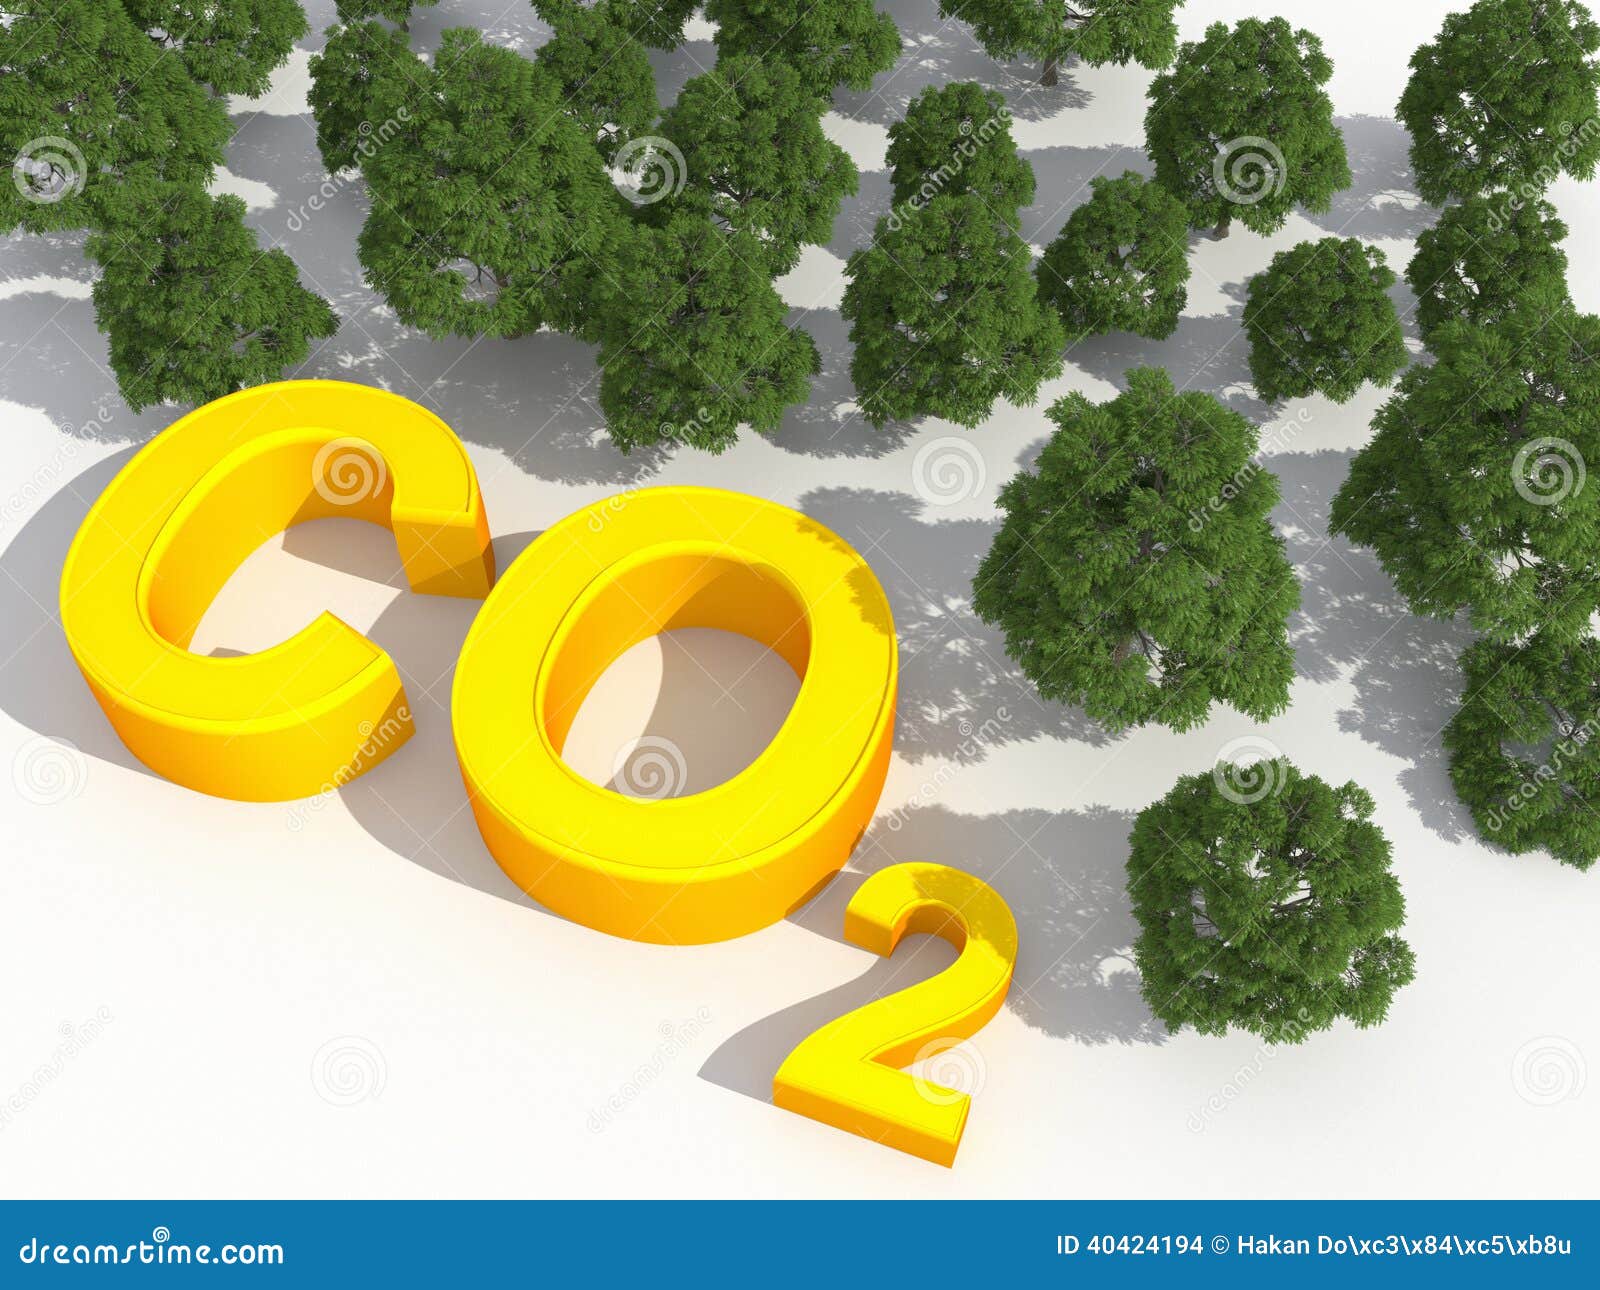 co2 and environmental greenhouse gases concept